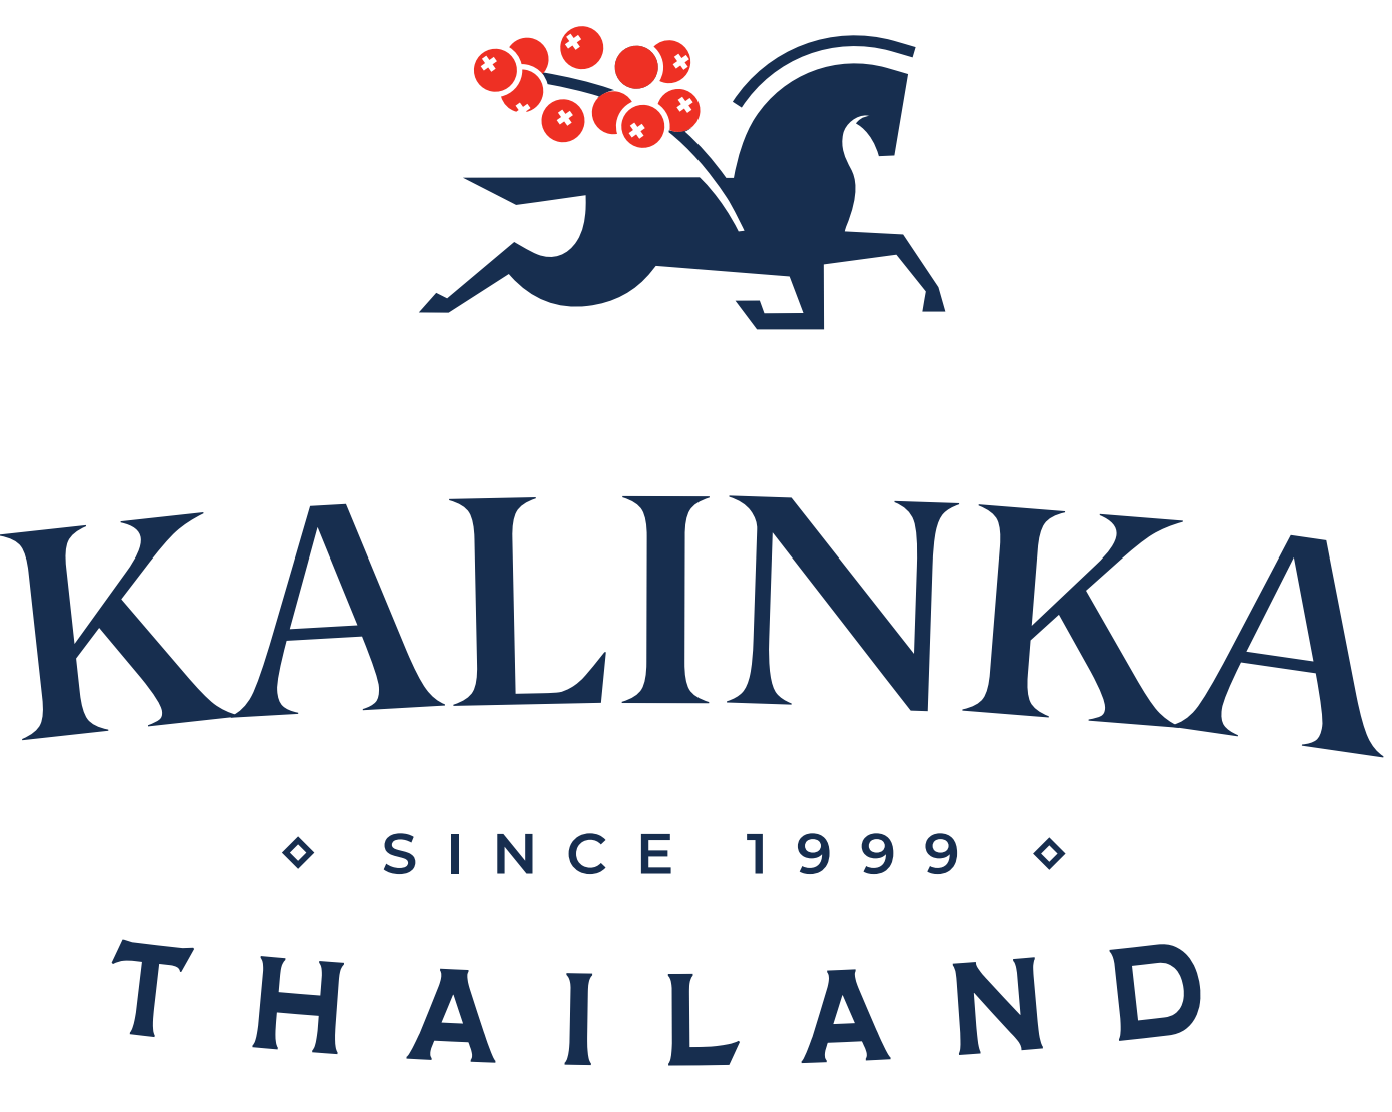 Kalinka Thailand Joins The Thailand International Boat Show A Luxury Lifestyle Event 2024